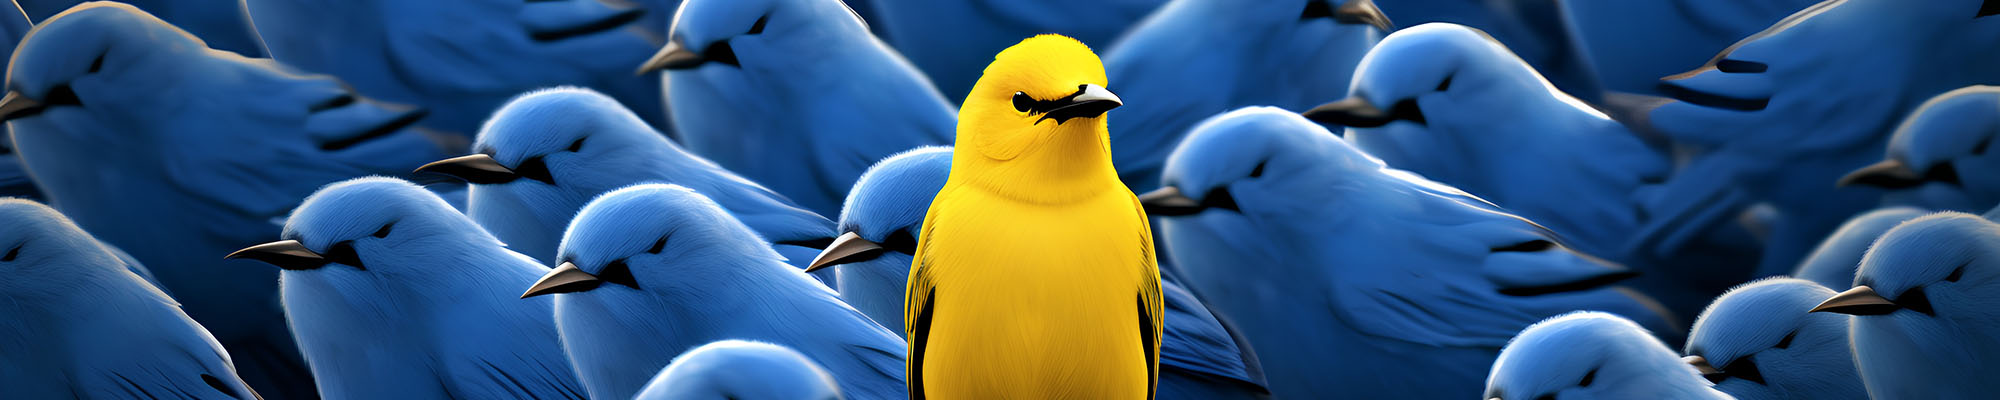 Group of blue birds with yellow bird in middle